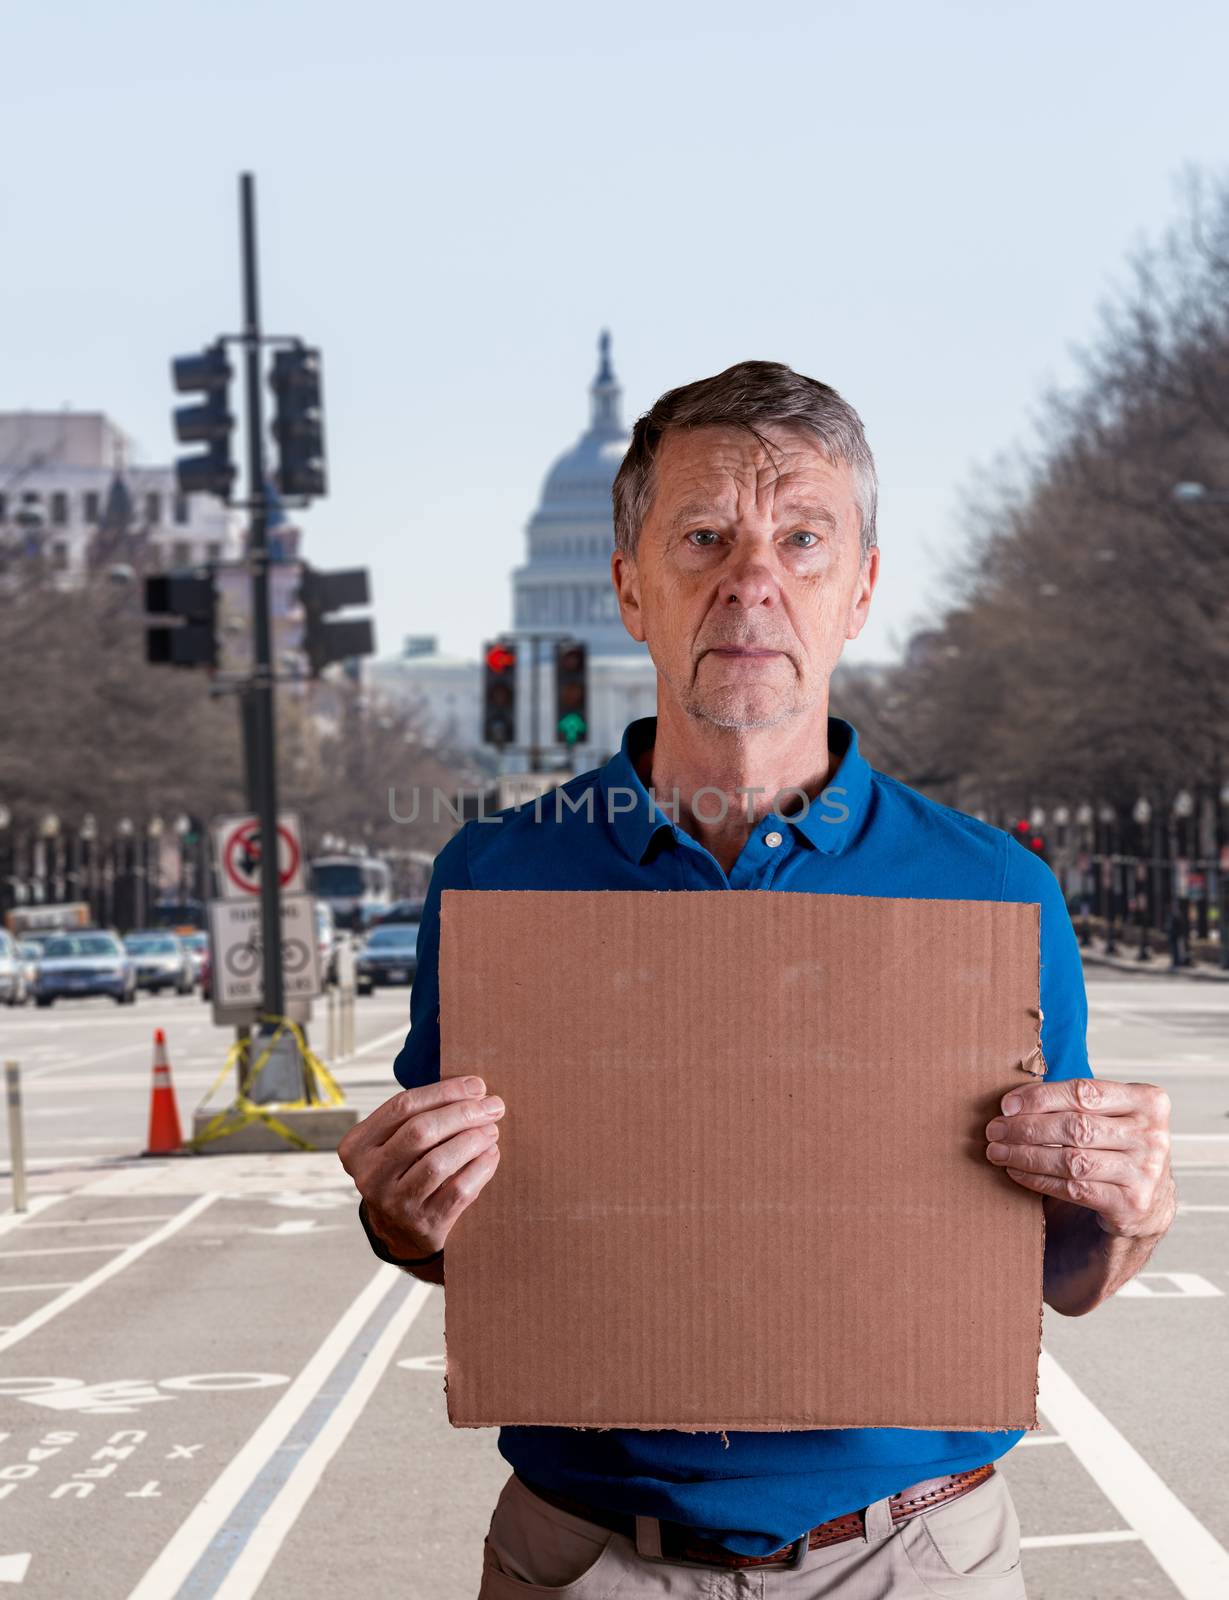 Senior caucasian man holding a blank cardboard sign for copy space message. He is composited into Washington DC street scene